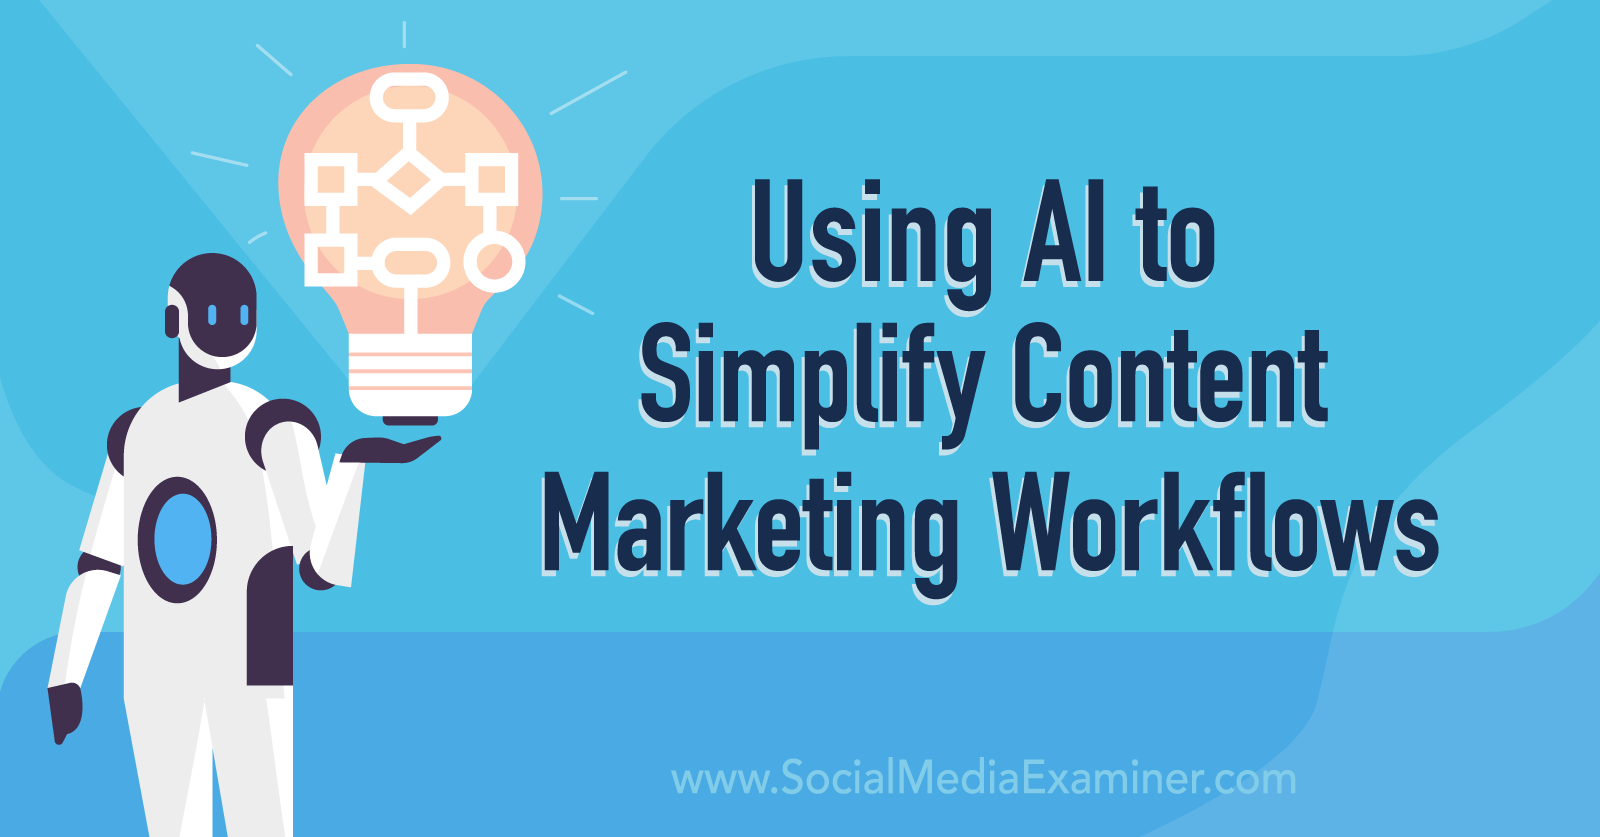 Using AI to Simplify Content Marketing Workflows by Social Media Examiner